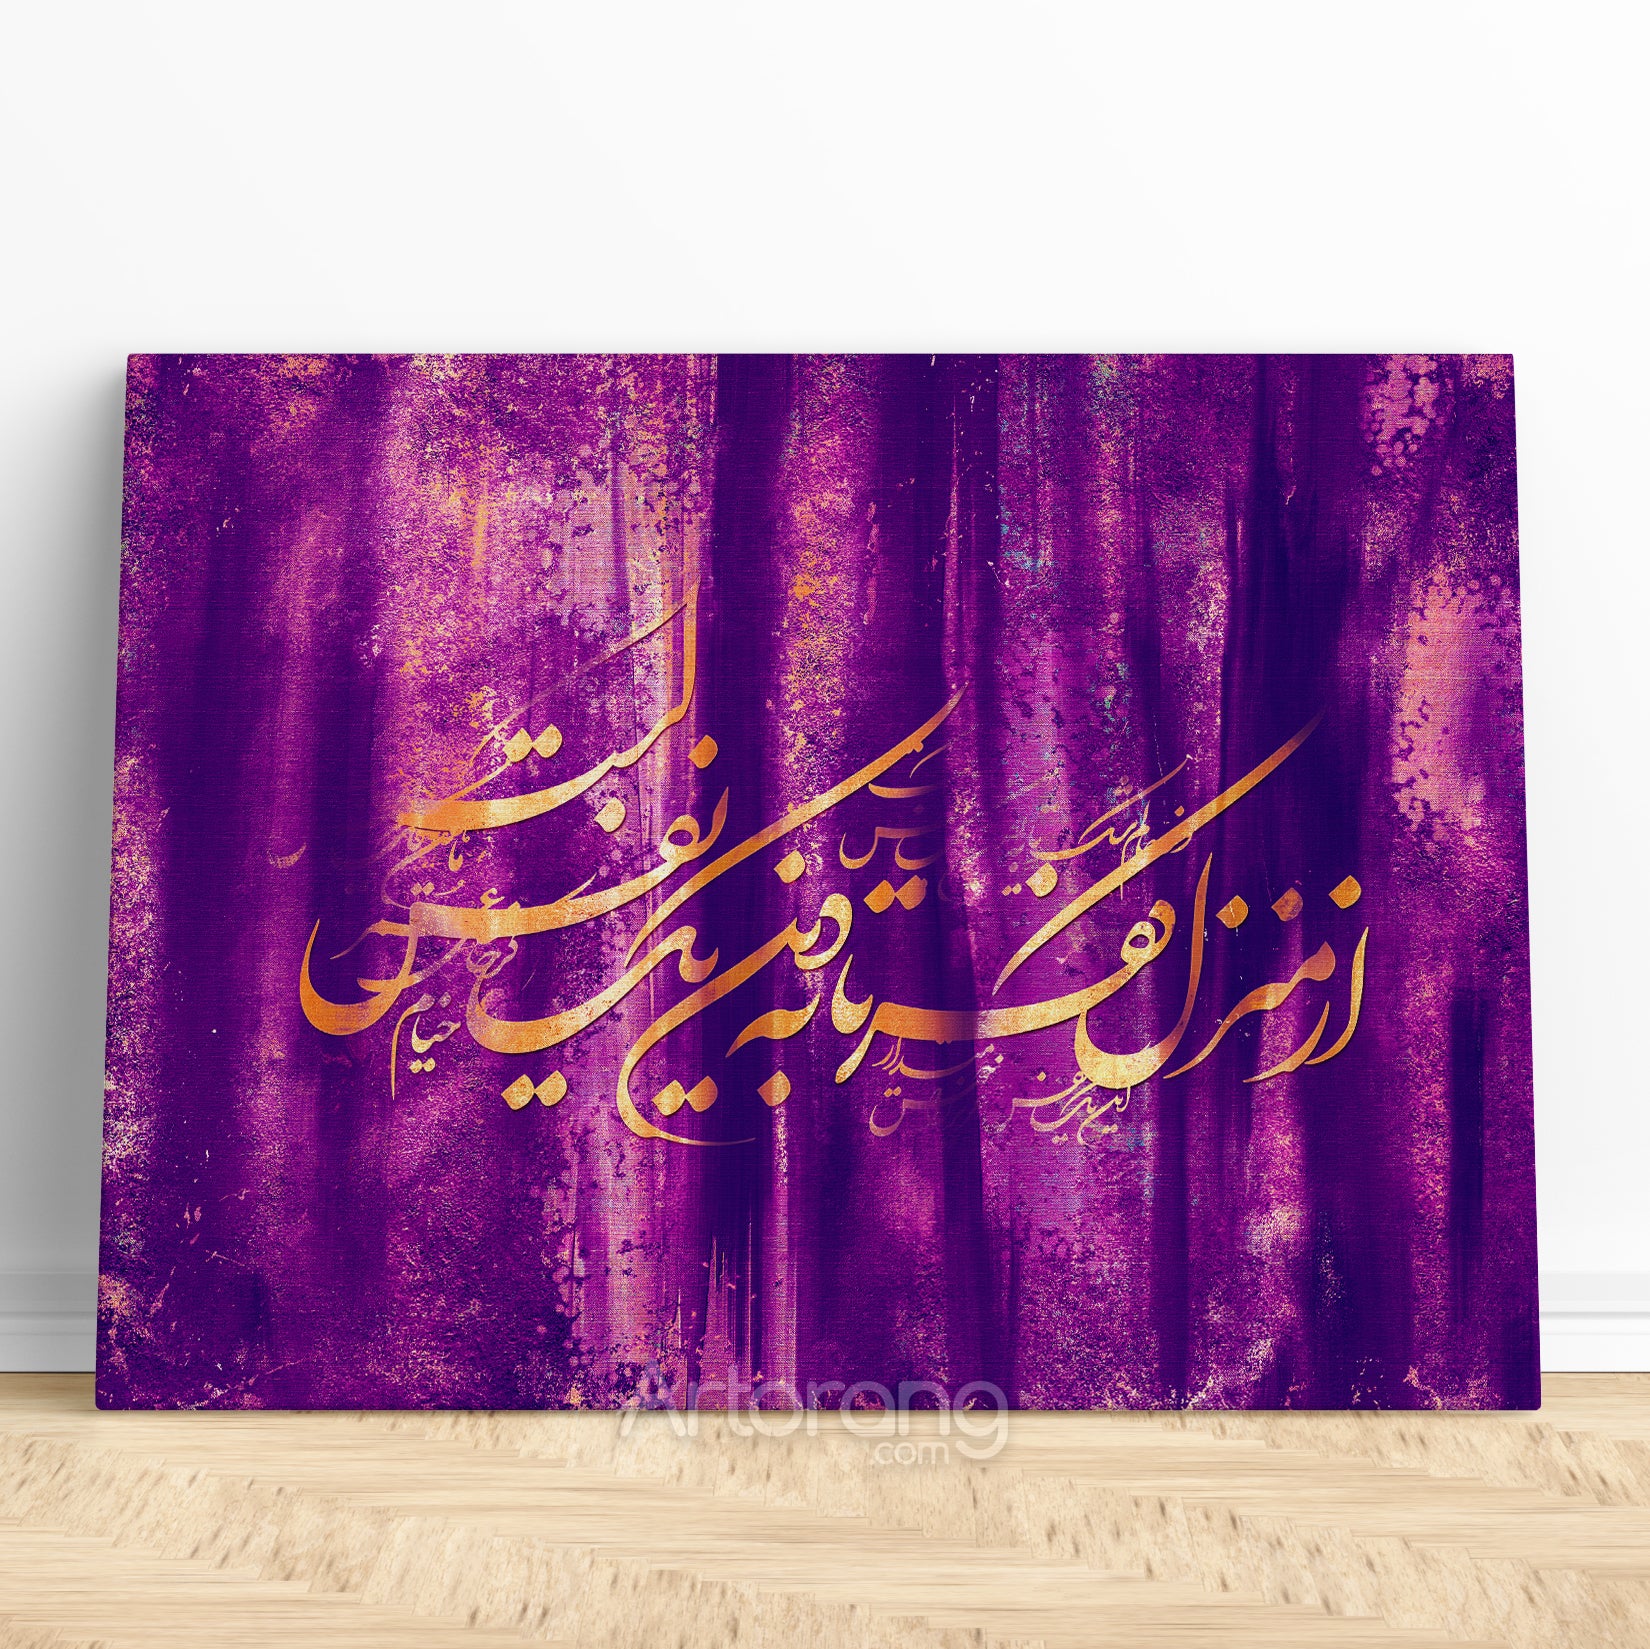 Our life is just a breath, Khayyam quote with Persian calligraphy, Persian art canvas print, Iranian gift